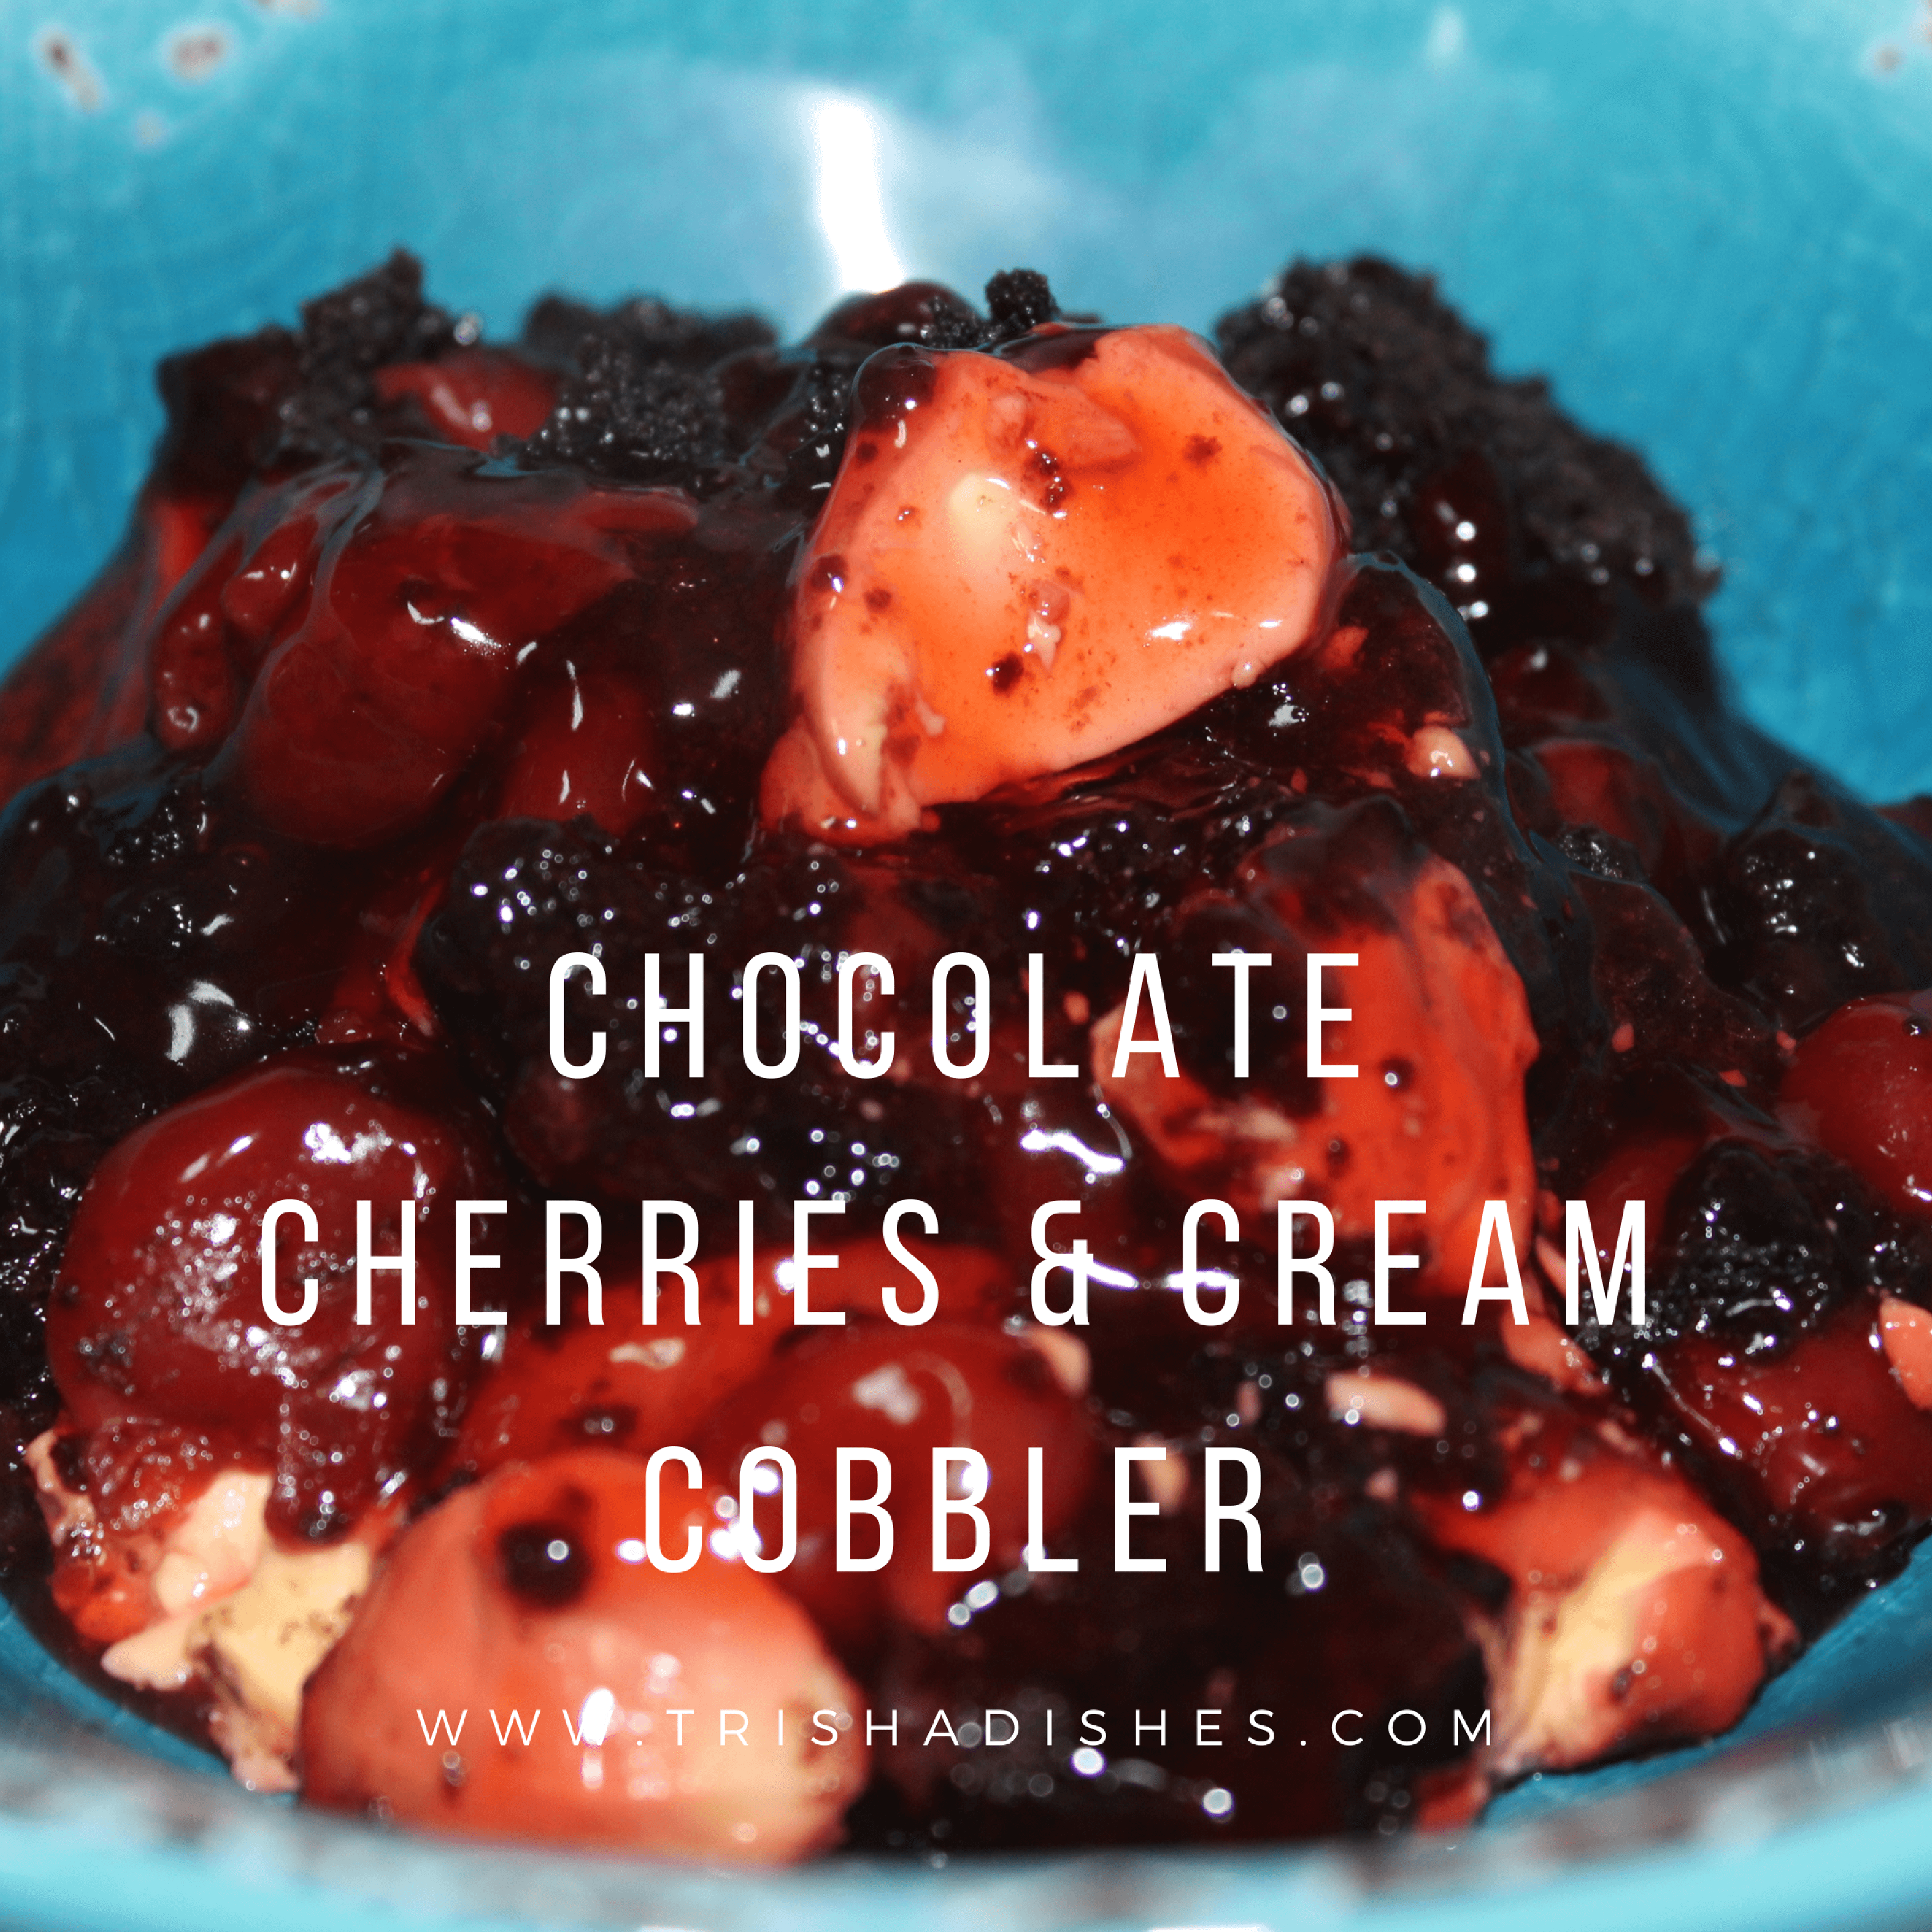 This Chocolate Cherry Cobbler is good enough for a special occasion but easy enough for an ordinary weeknight's dessert.